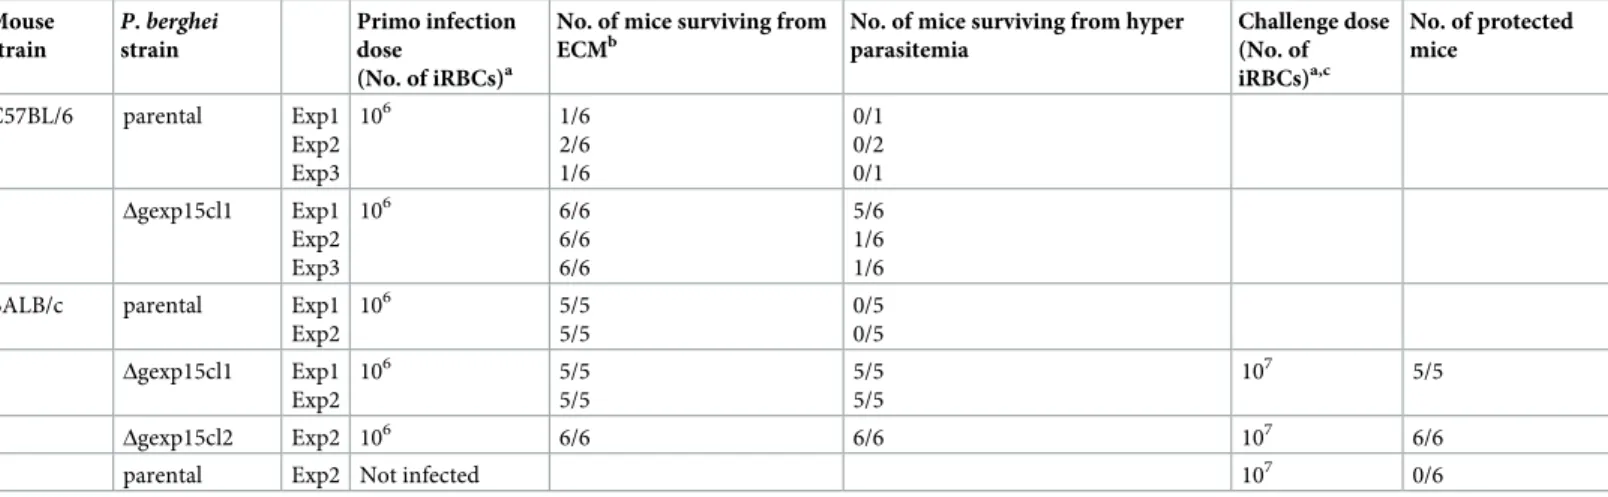 Table 1. Time course of parental and Δgexp15 parasites infection in C57BL/6 and BALB/c mice and protection of BALB/c mice challenged with parental parasites.